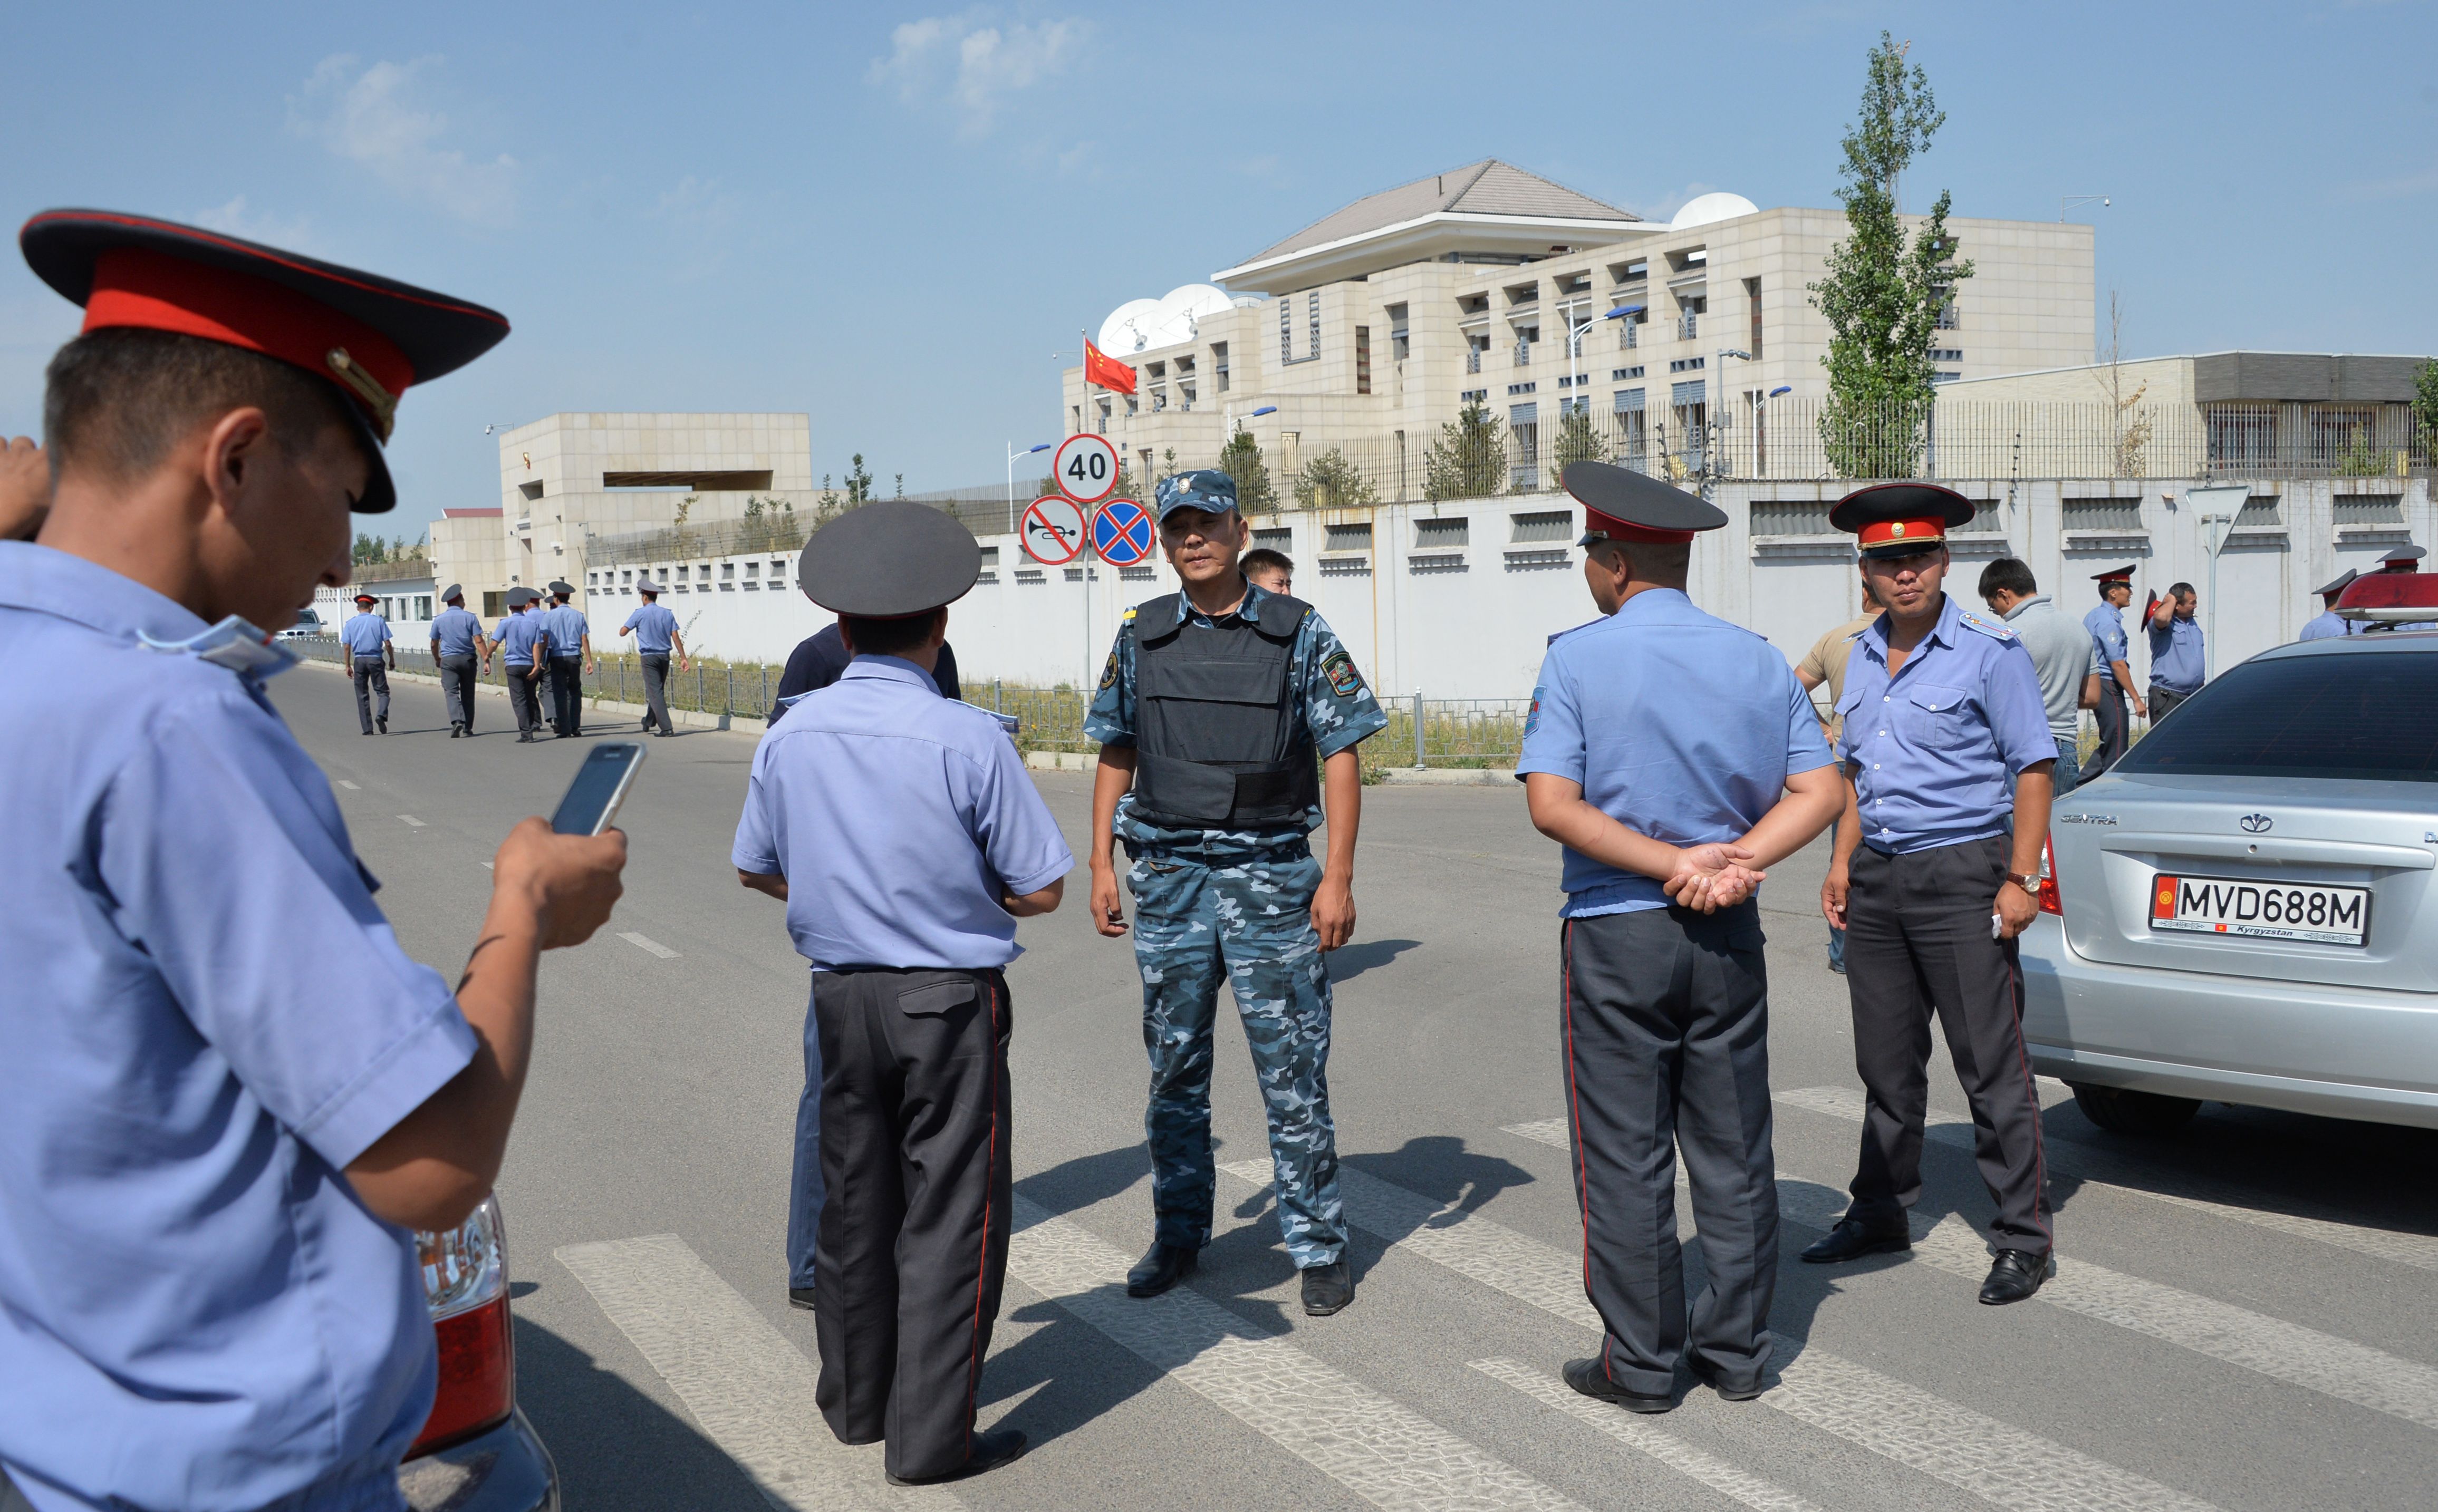 Police officers gather outside the Chinese embassy in Bishkek, Kyrgyzstan, on Aug. 30, 2016. A van driven by a suicide bomber exploded after ramming through a gate. (Vyacheslav Oseledko—AFP/Getty Images)